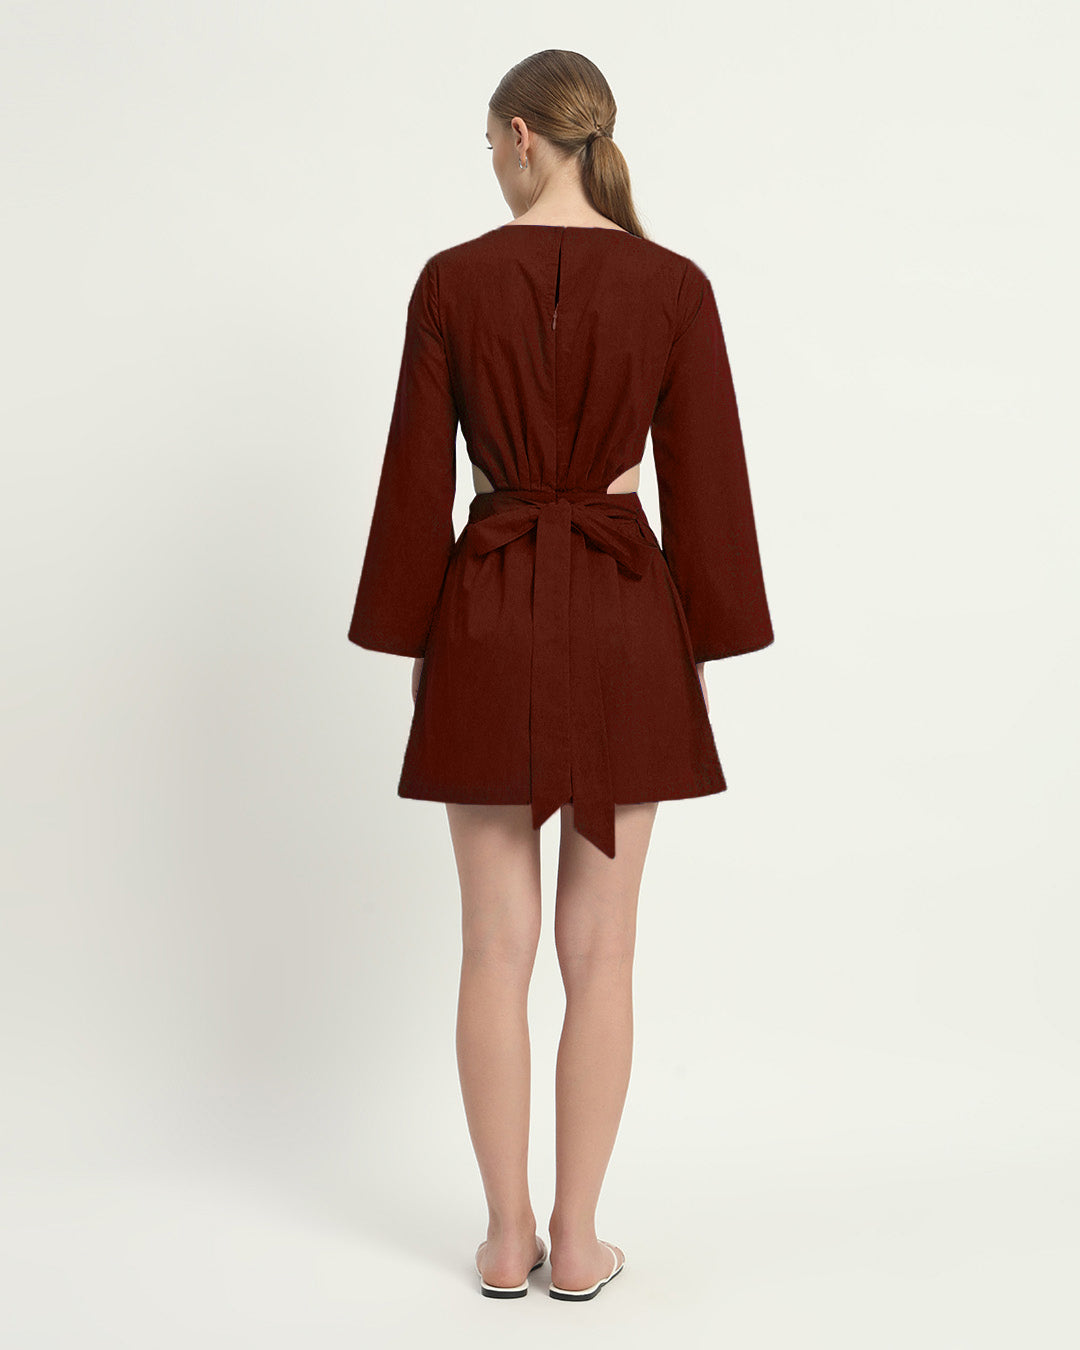 The Eloy Rouge Cotton Dress